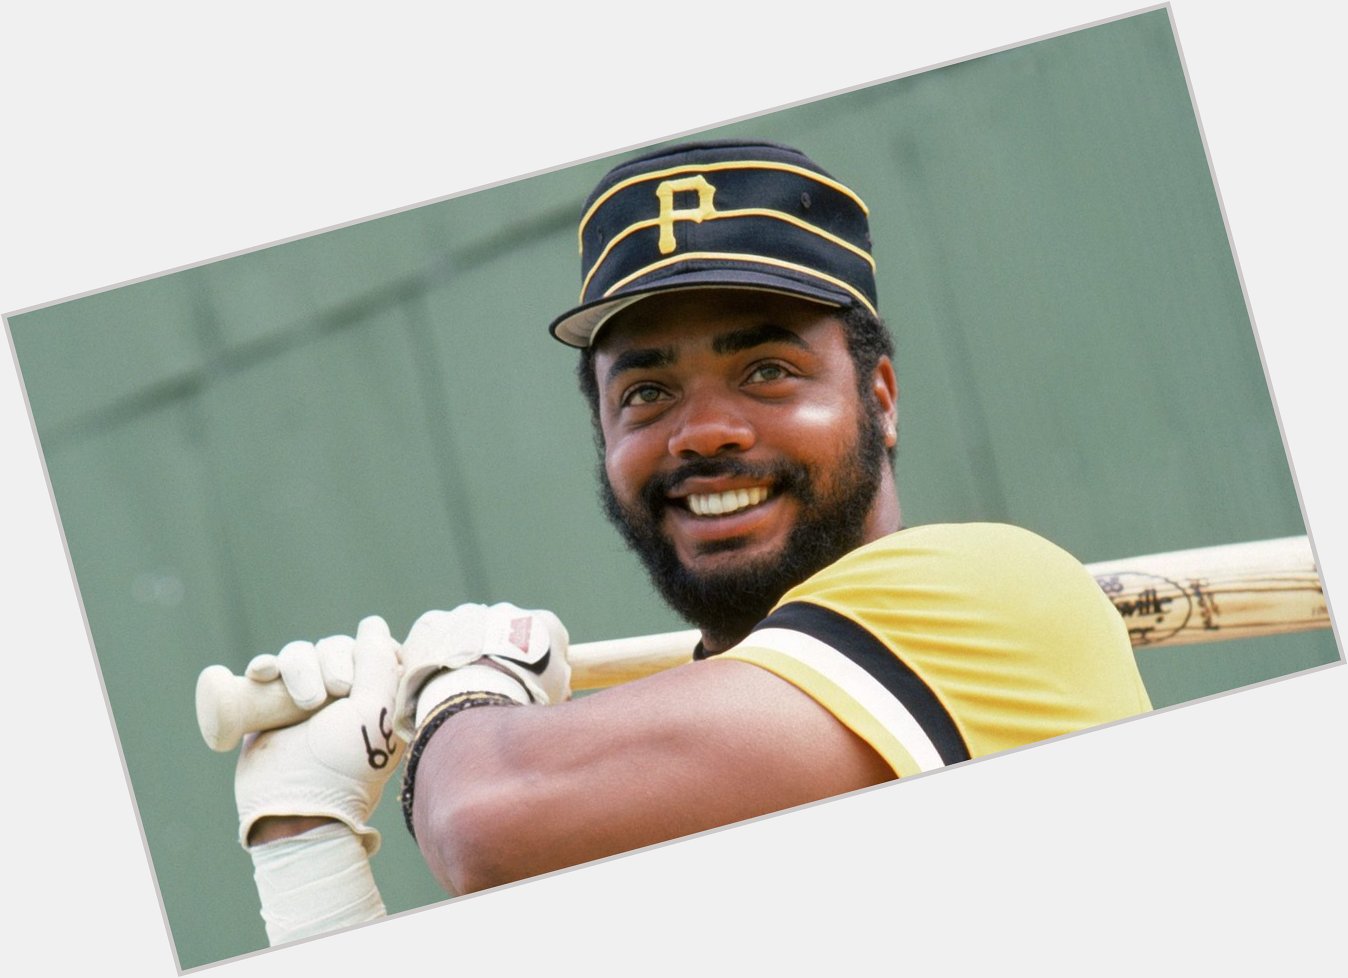 6/9

Dave Parker turns 69 years old.

Happy birthday to the Cobra. 